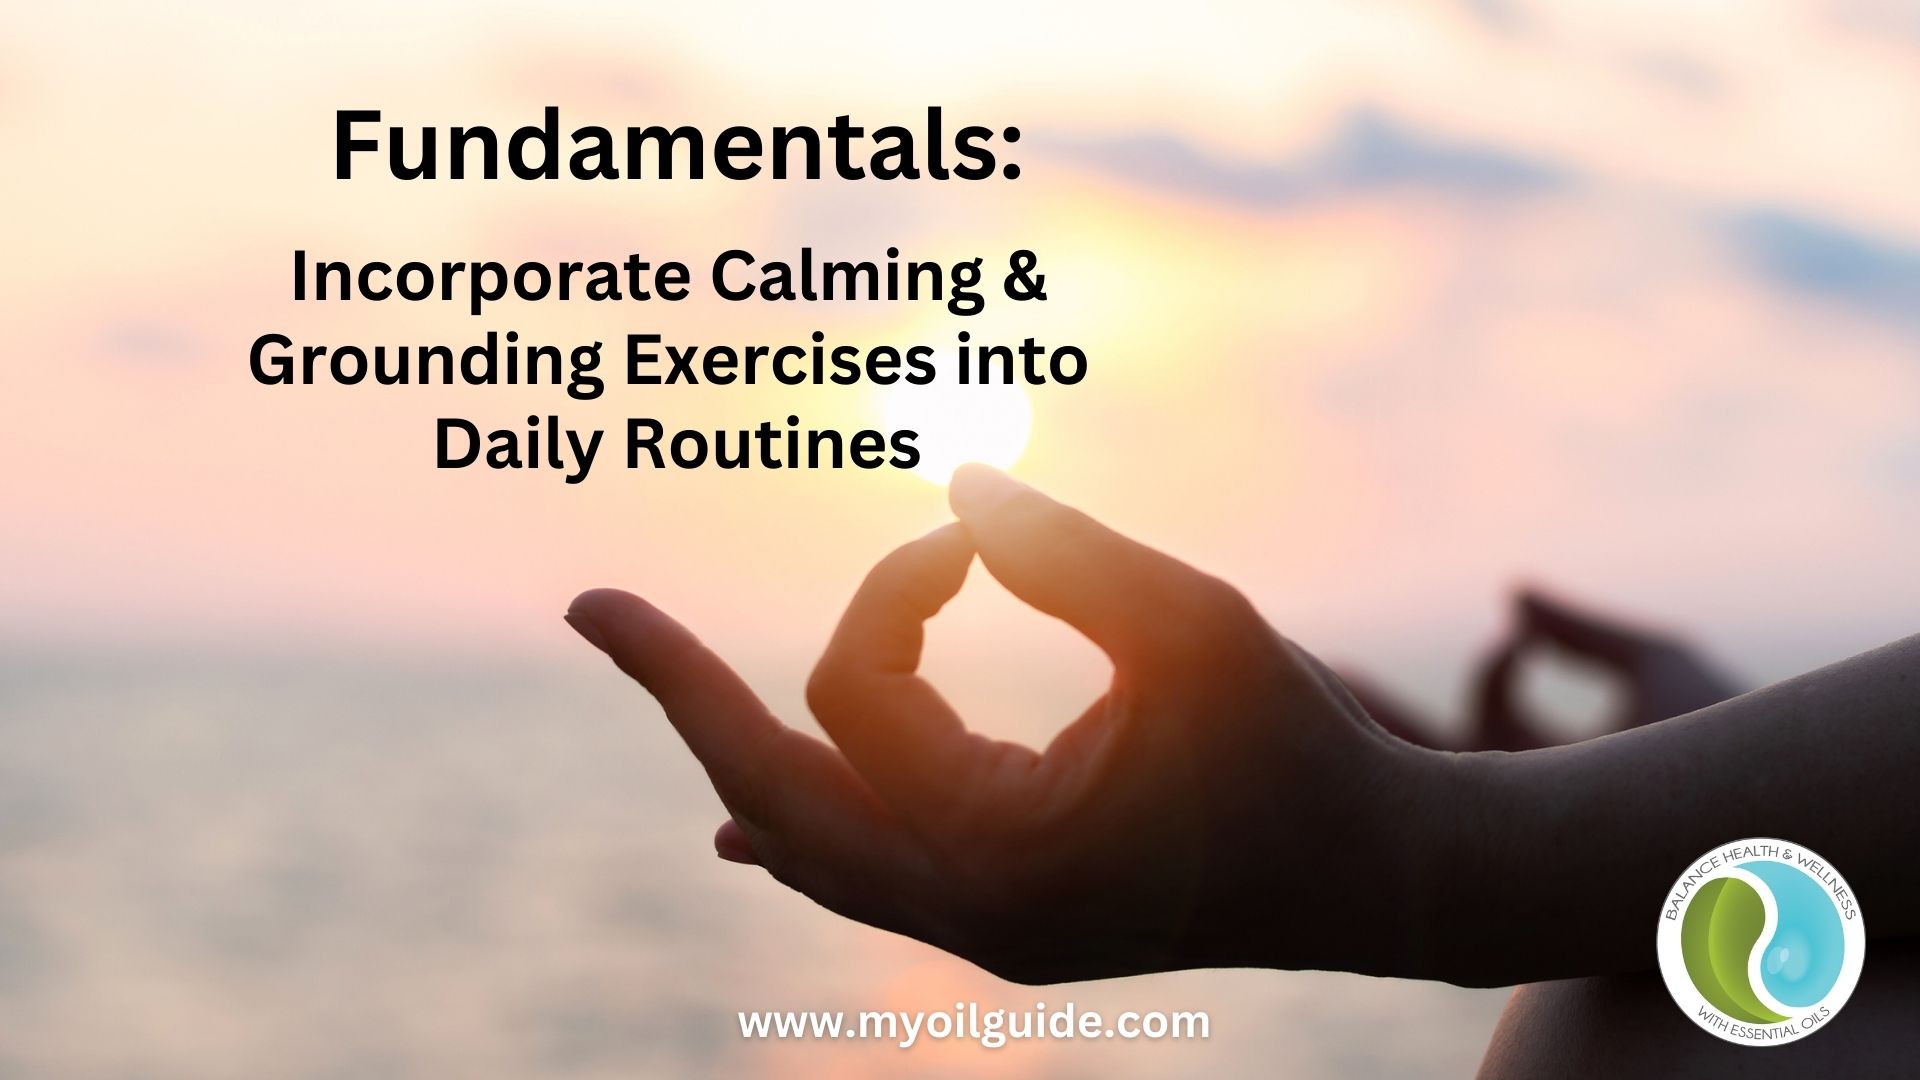 Grounding and Calming exercises